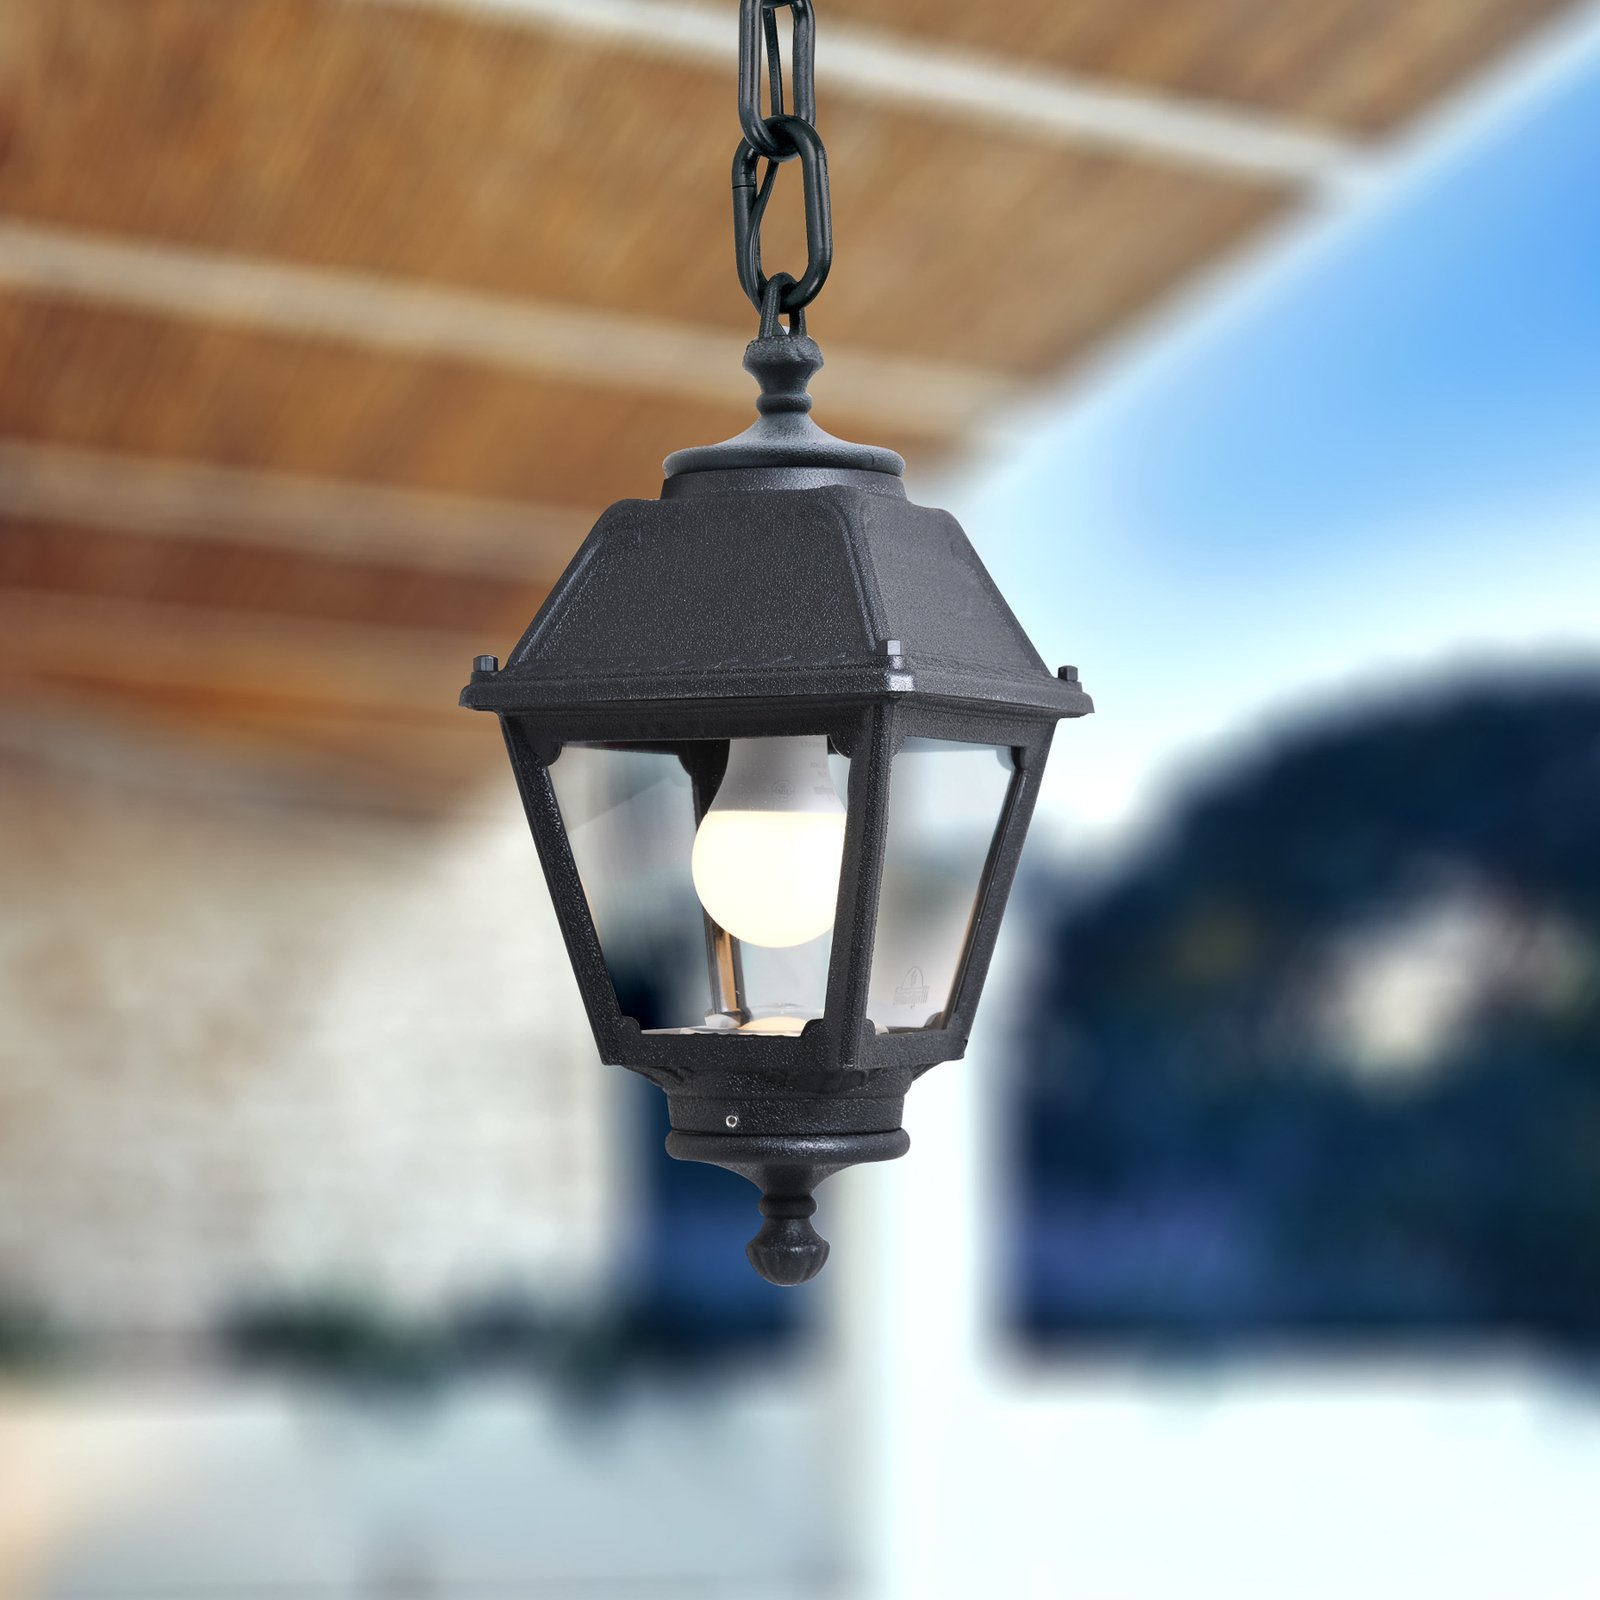 Outdoor hanging light Sichem/Mary black cover clear 2,700 K